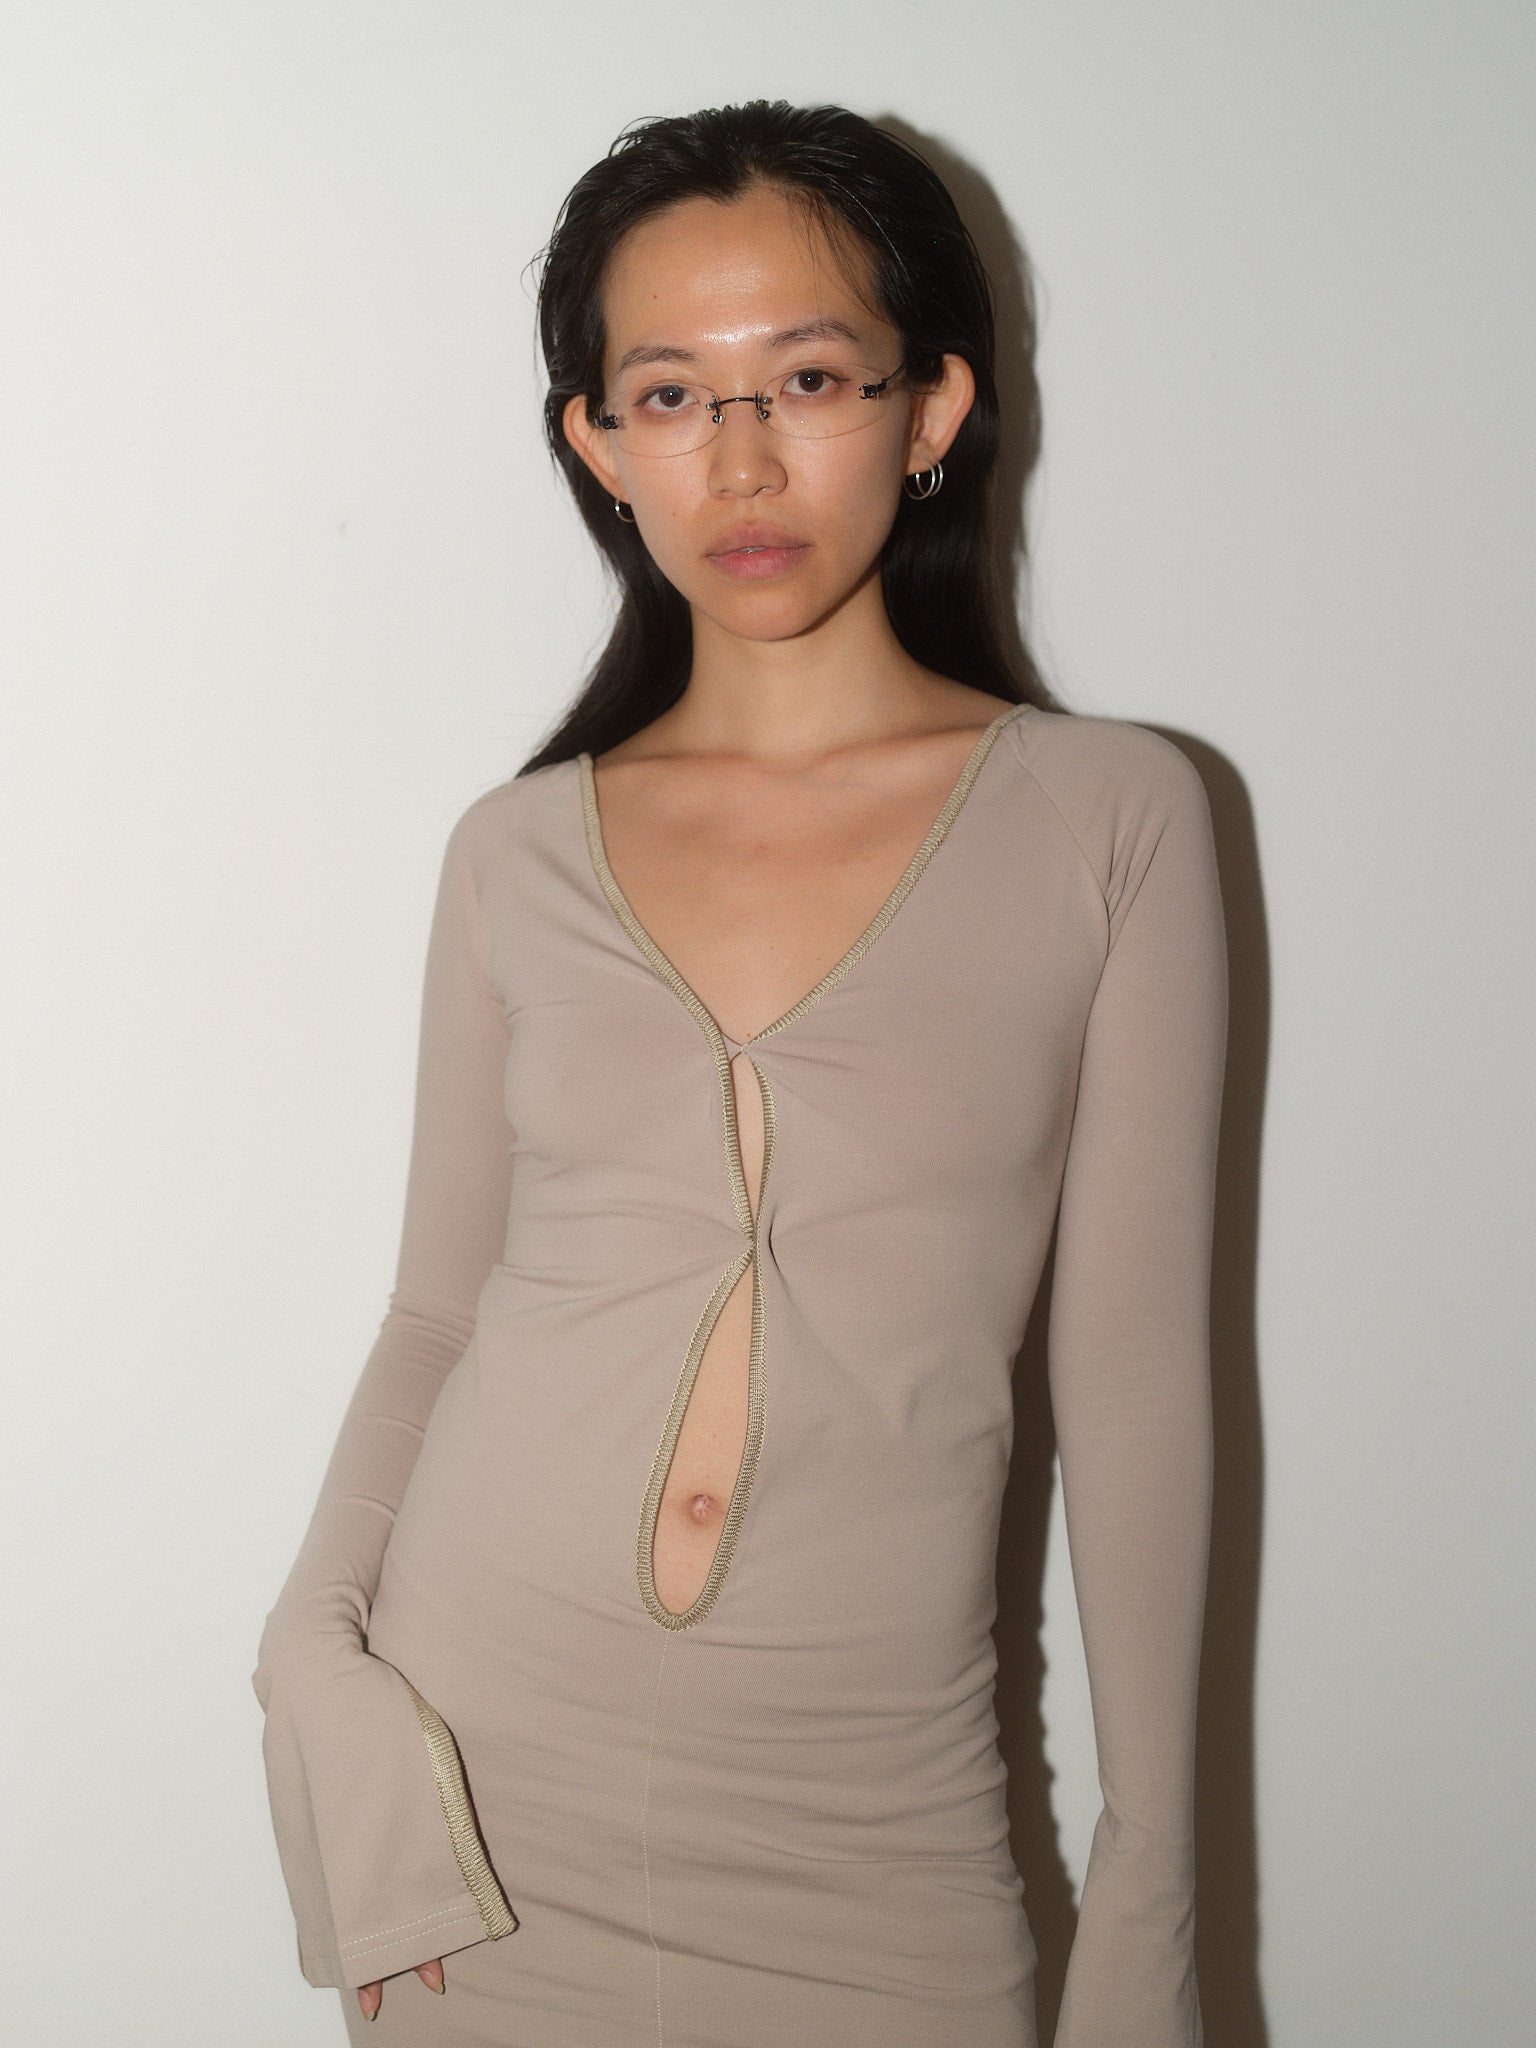 Cotton Jersey Dress designed by Christina Seewald. Sustainable, designed and made in Europe. 